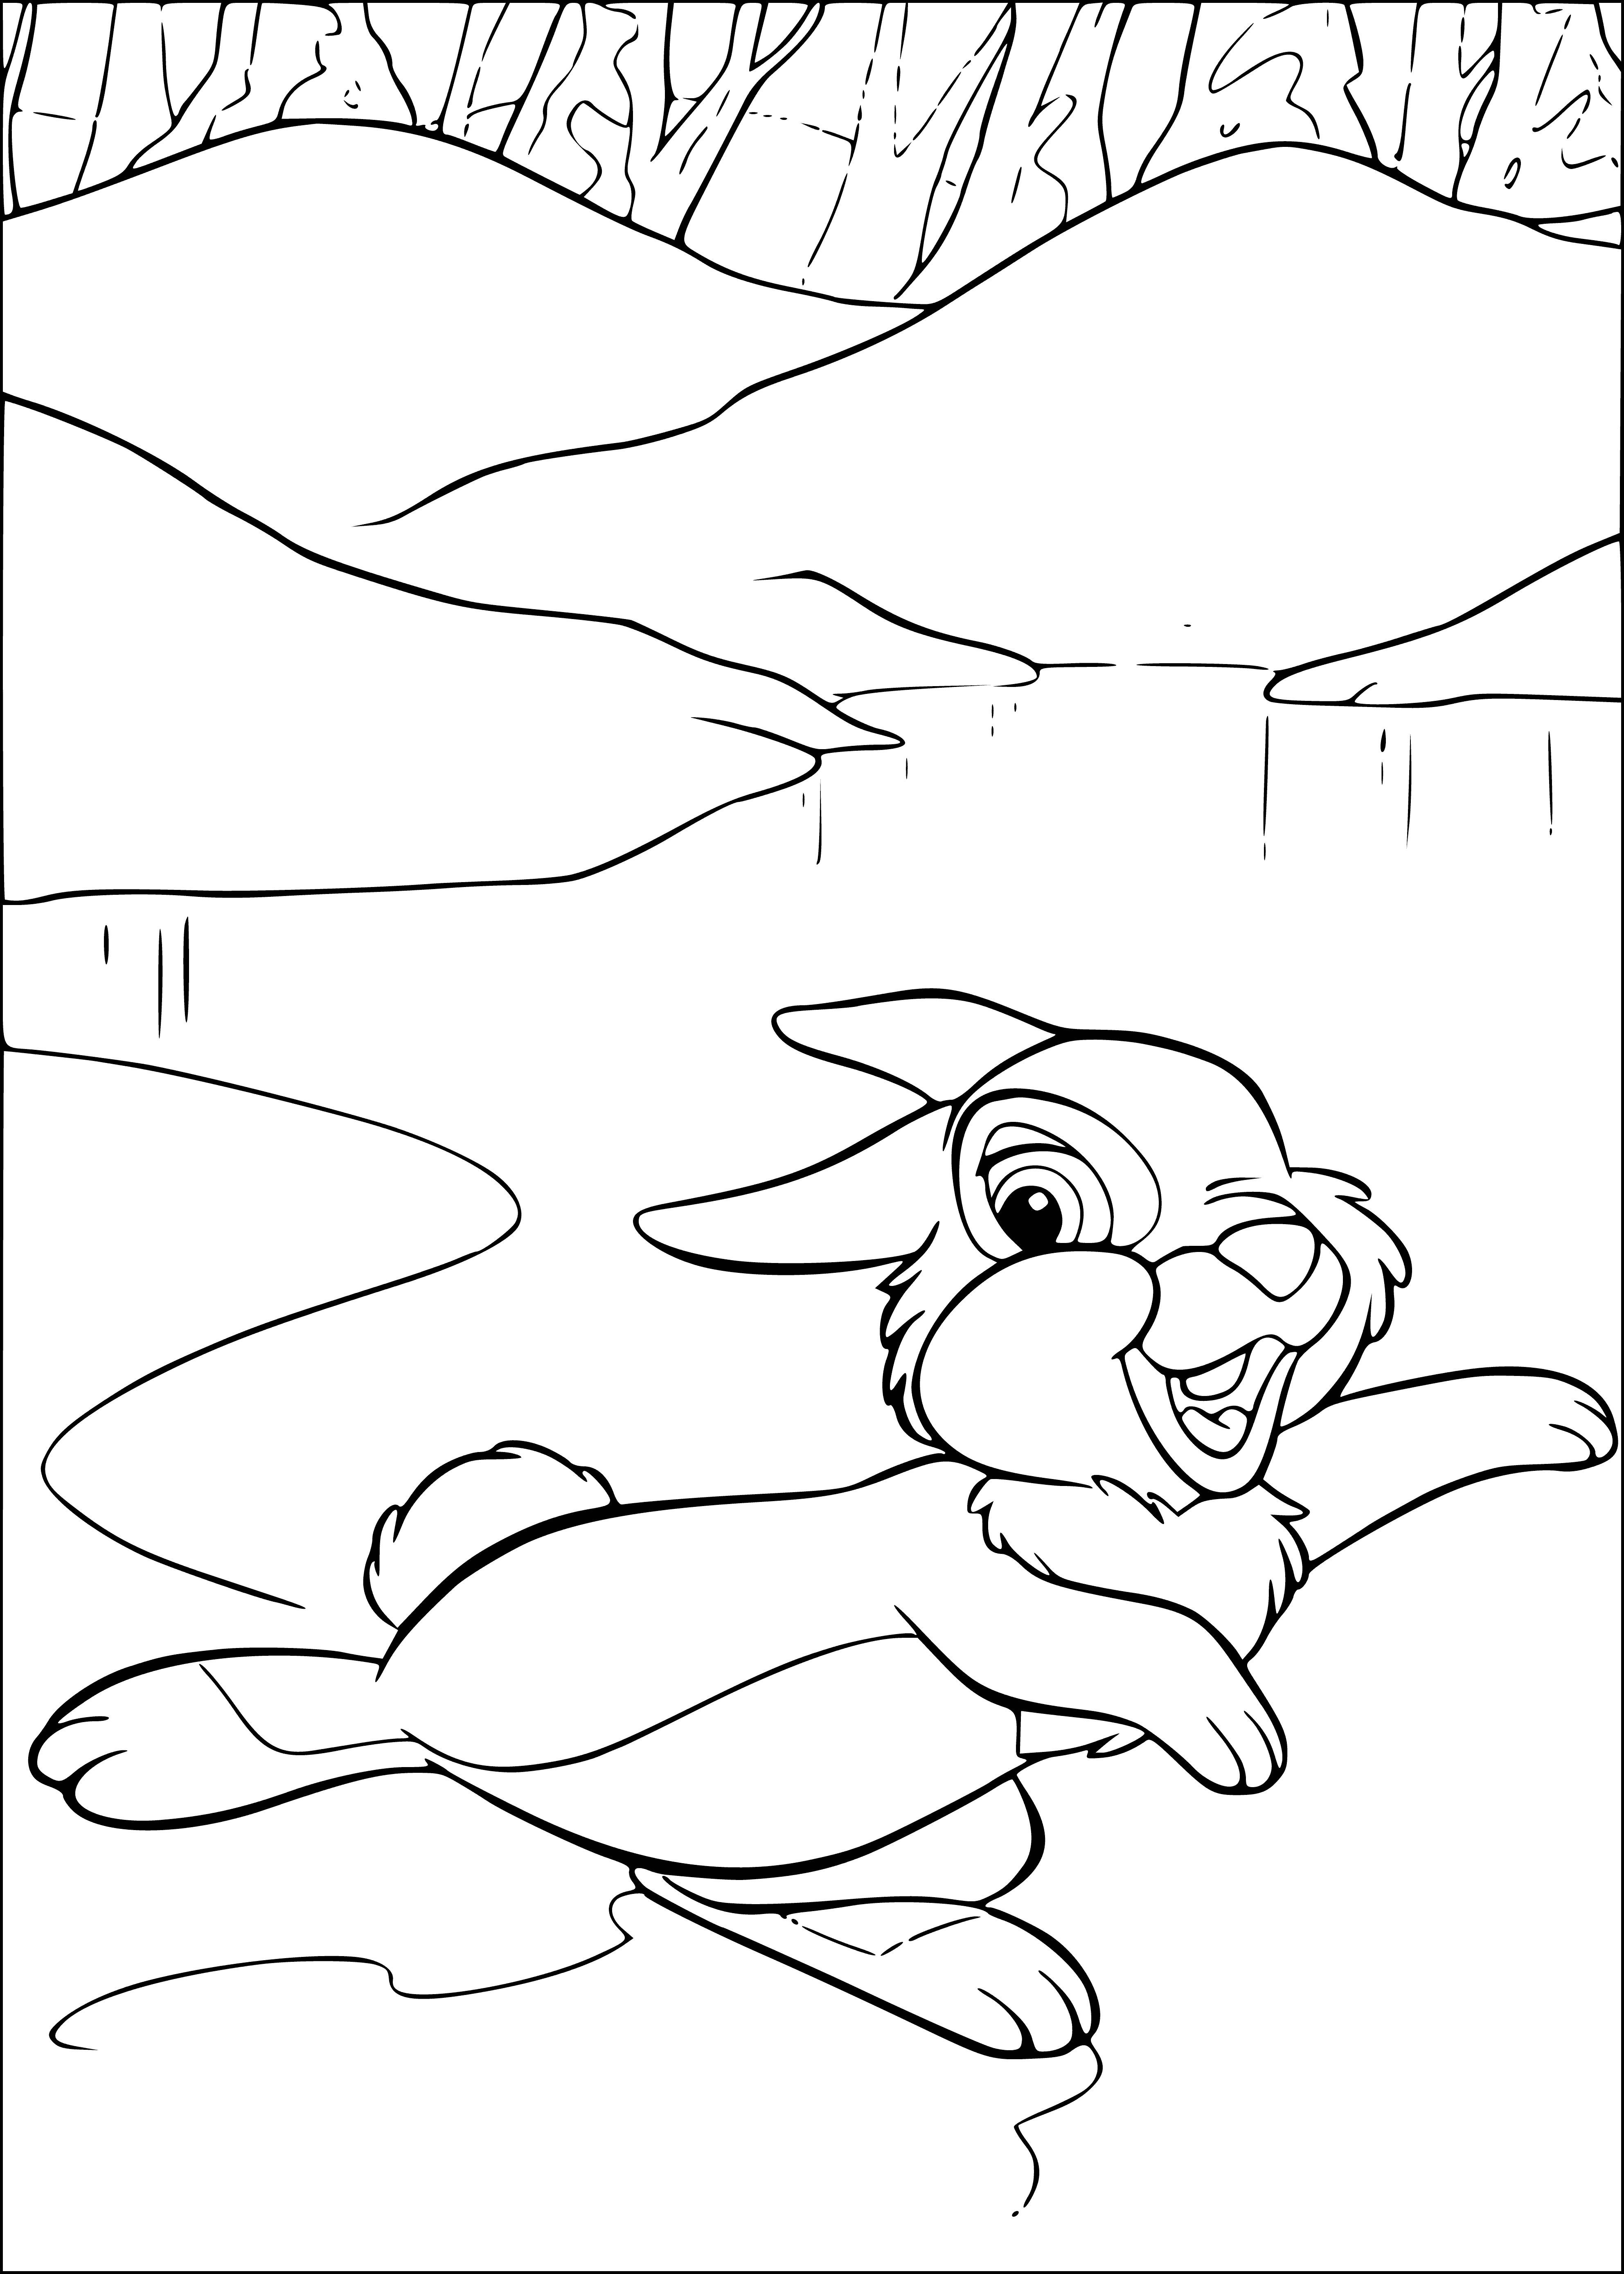 coloring page: Coloring page of a white rabbit on a block of ice in a blue sky: ears perked, paws lifted slightly, ready to explore its icy terrain. #BambiHareOnIce